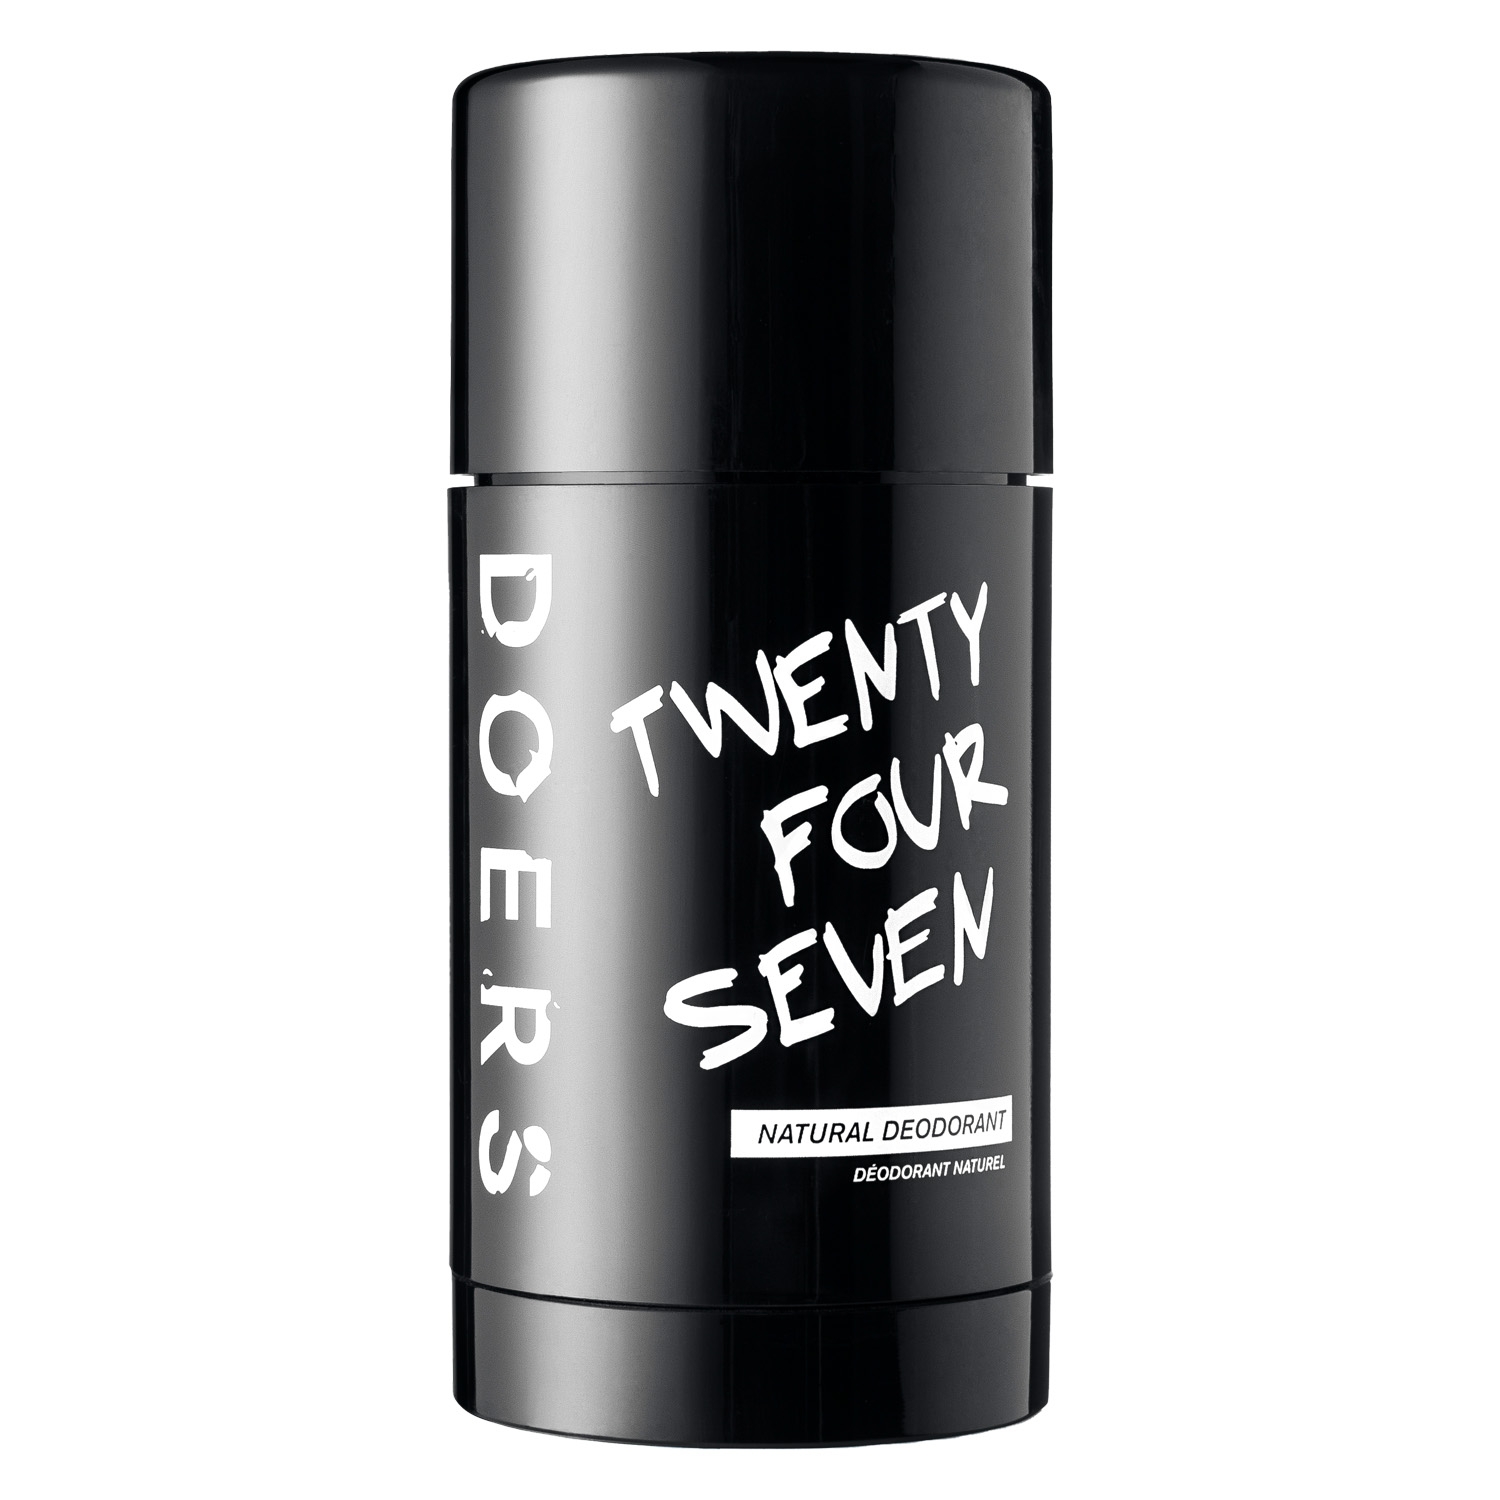 Product image from DOERS of London - Natural Deodorant Bergamot